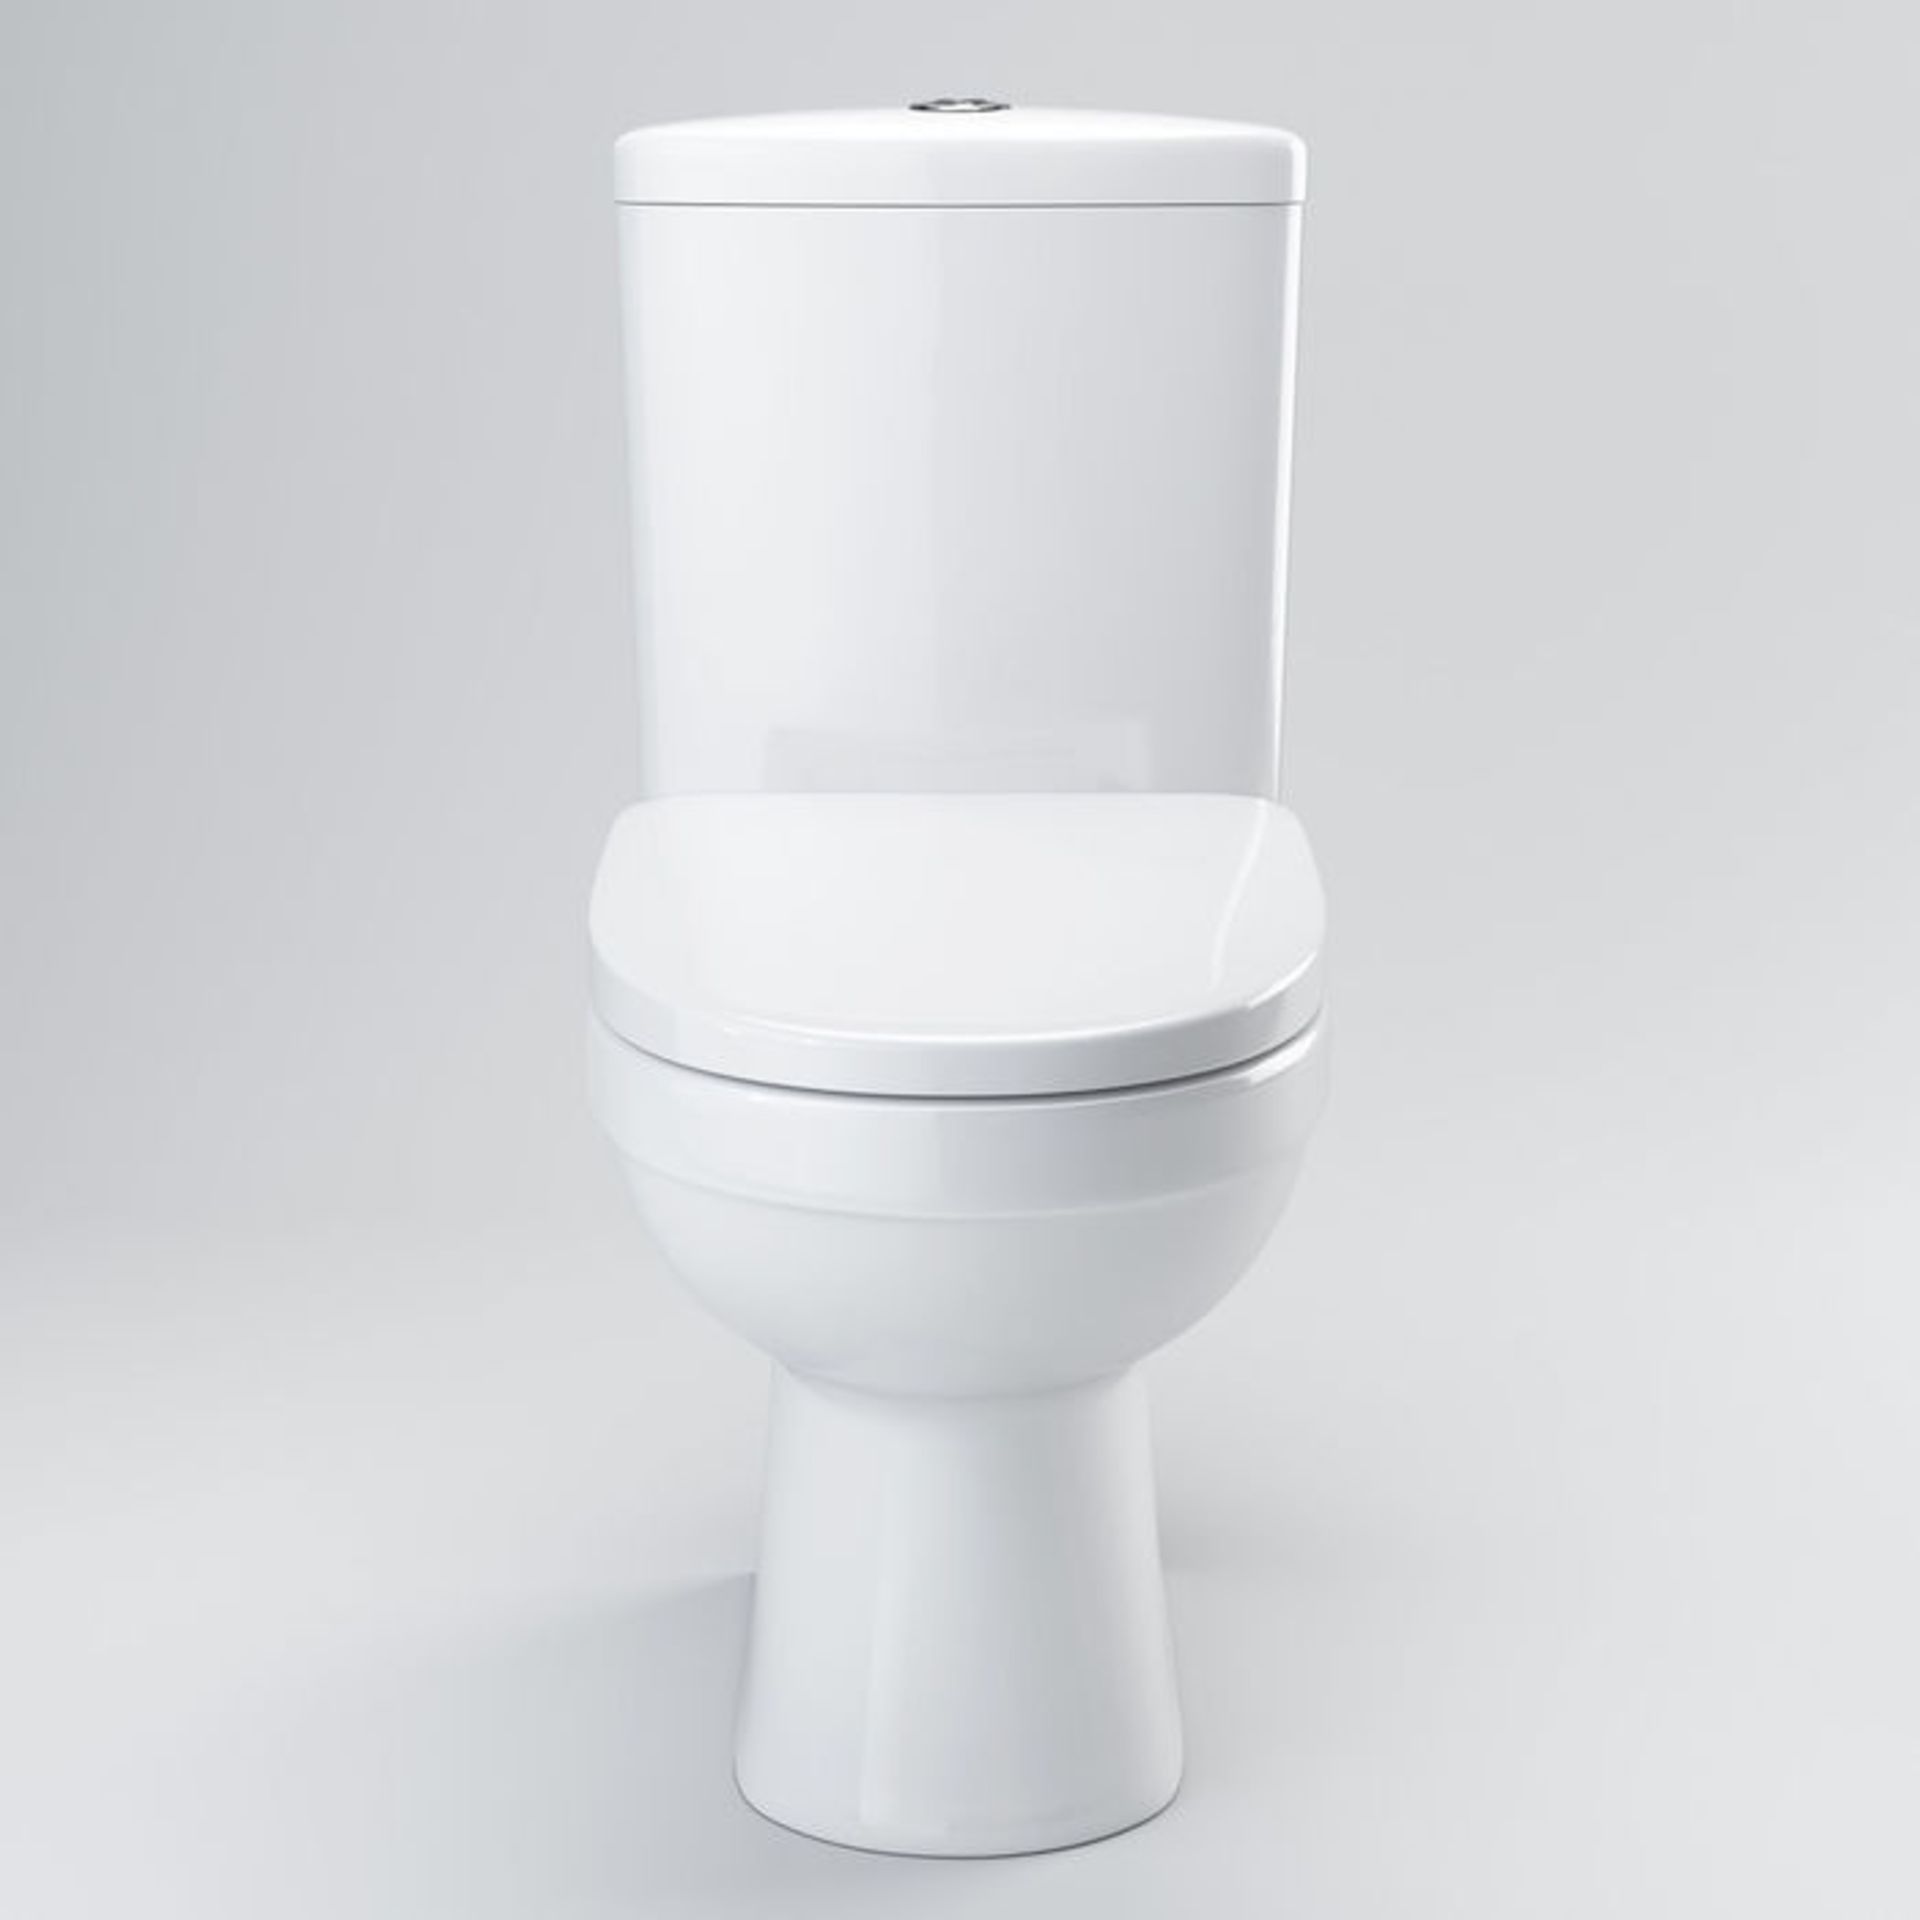 (ZZ68) Sabrosa II Close Coupled Toilet & Cistern inc Soft Close Seat. Made from White Vitreous China - Image 4 of 4